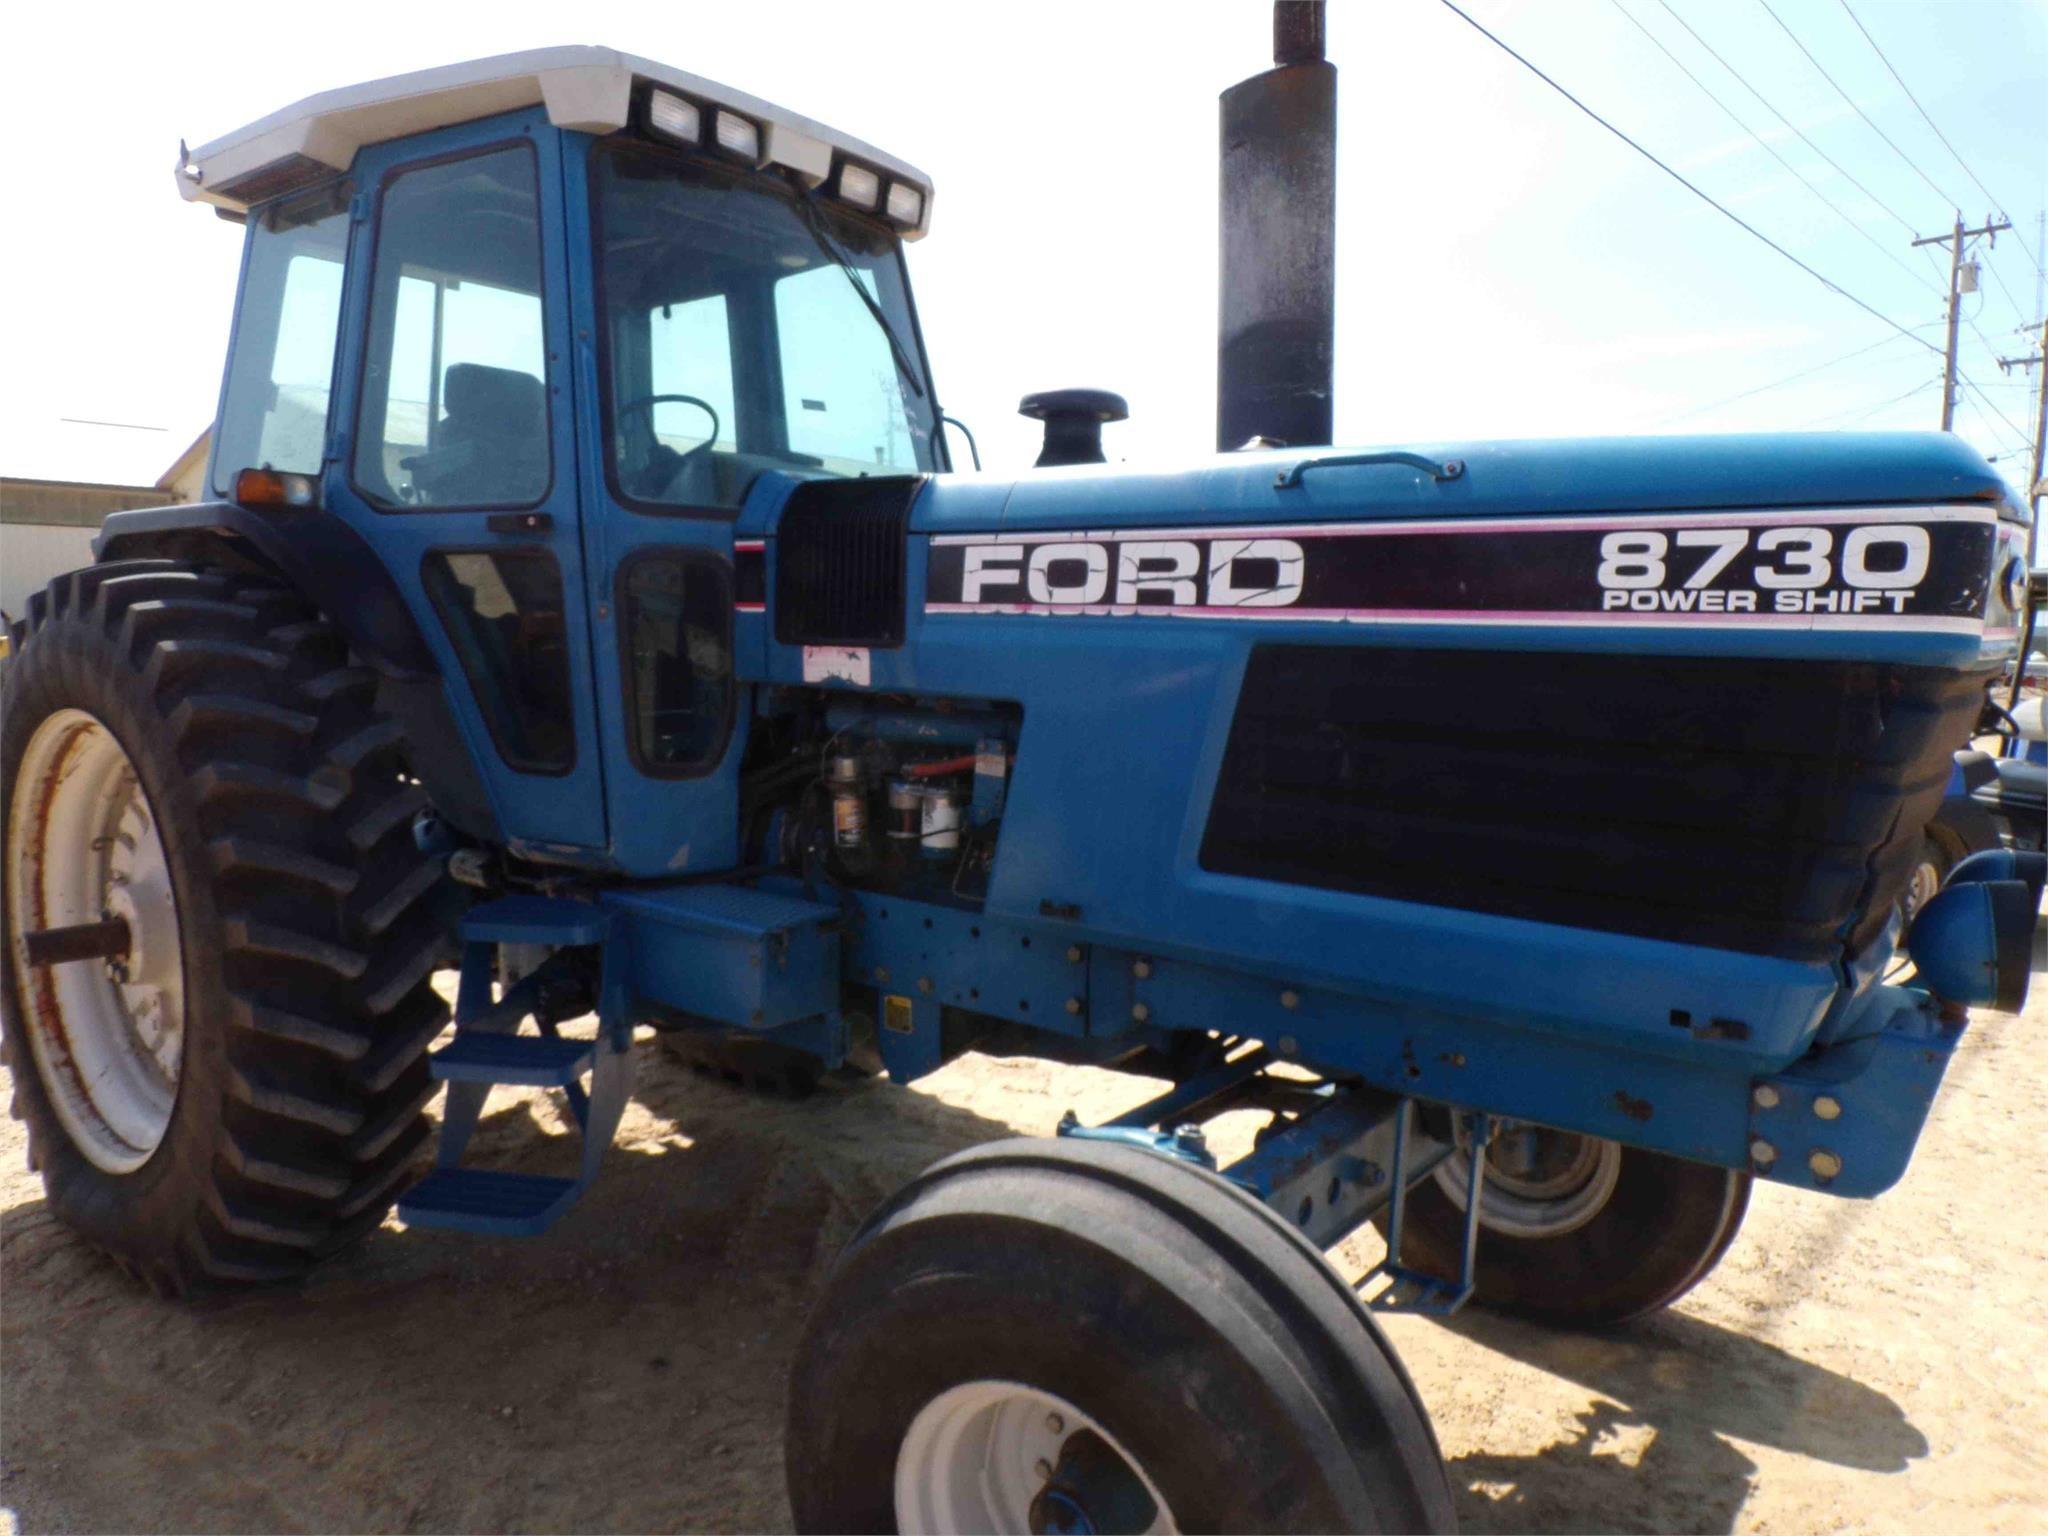 Ford 8730 Equipment Image0